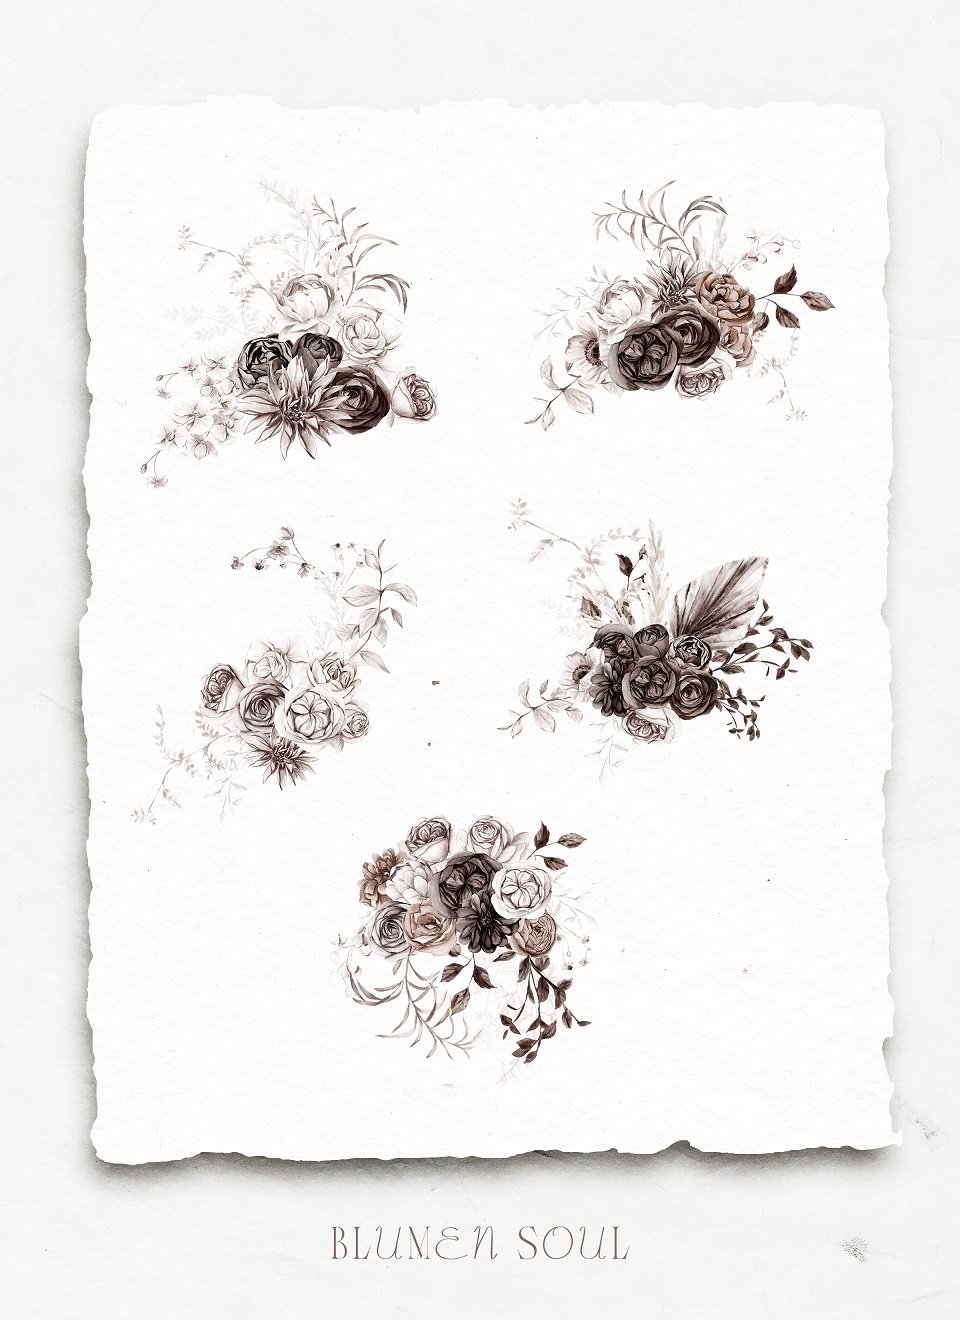 5 brown floral bouquet compositions on a white paper.